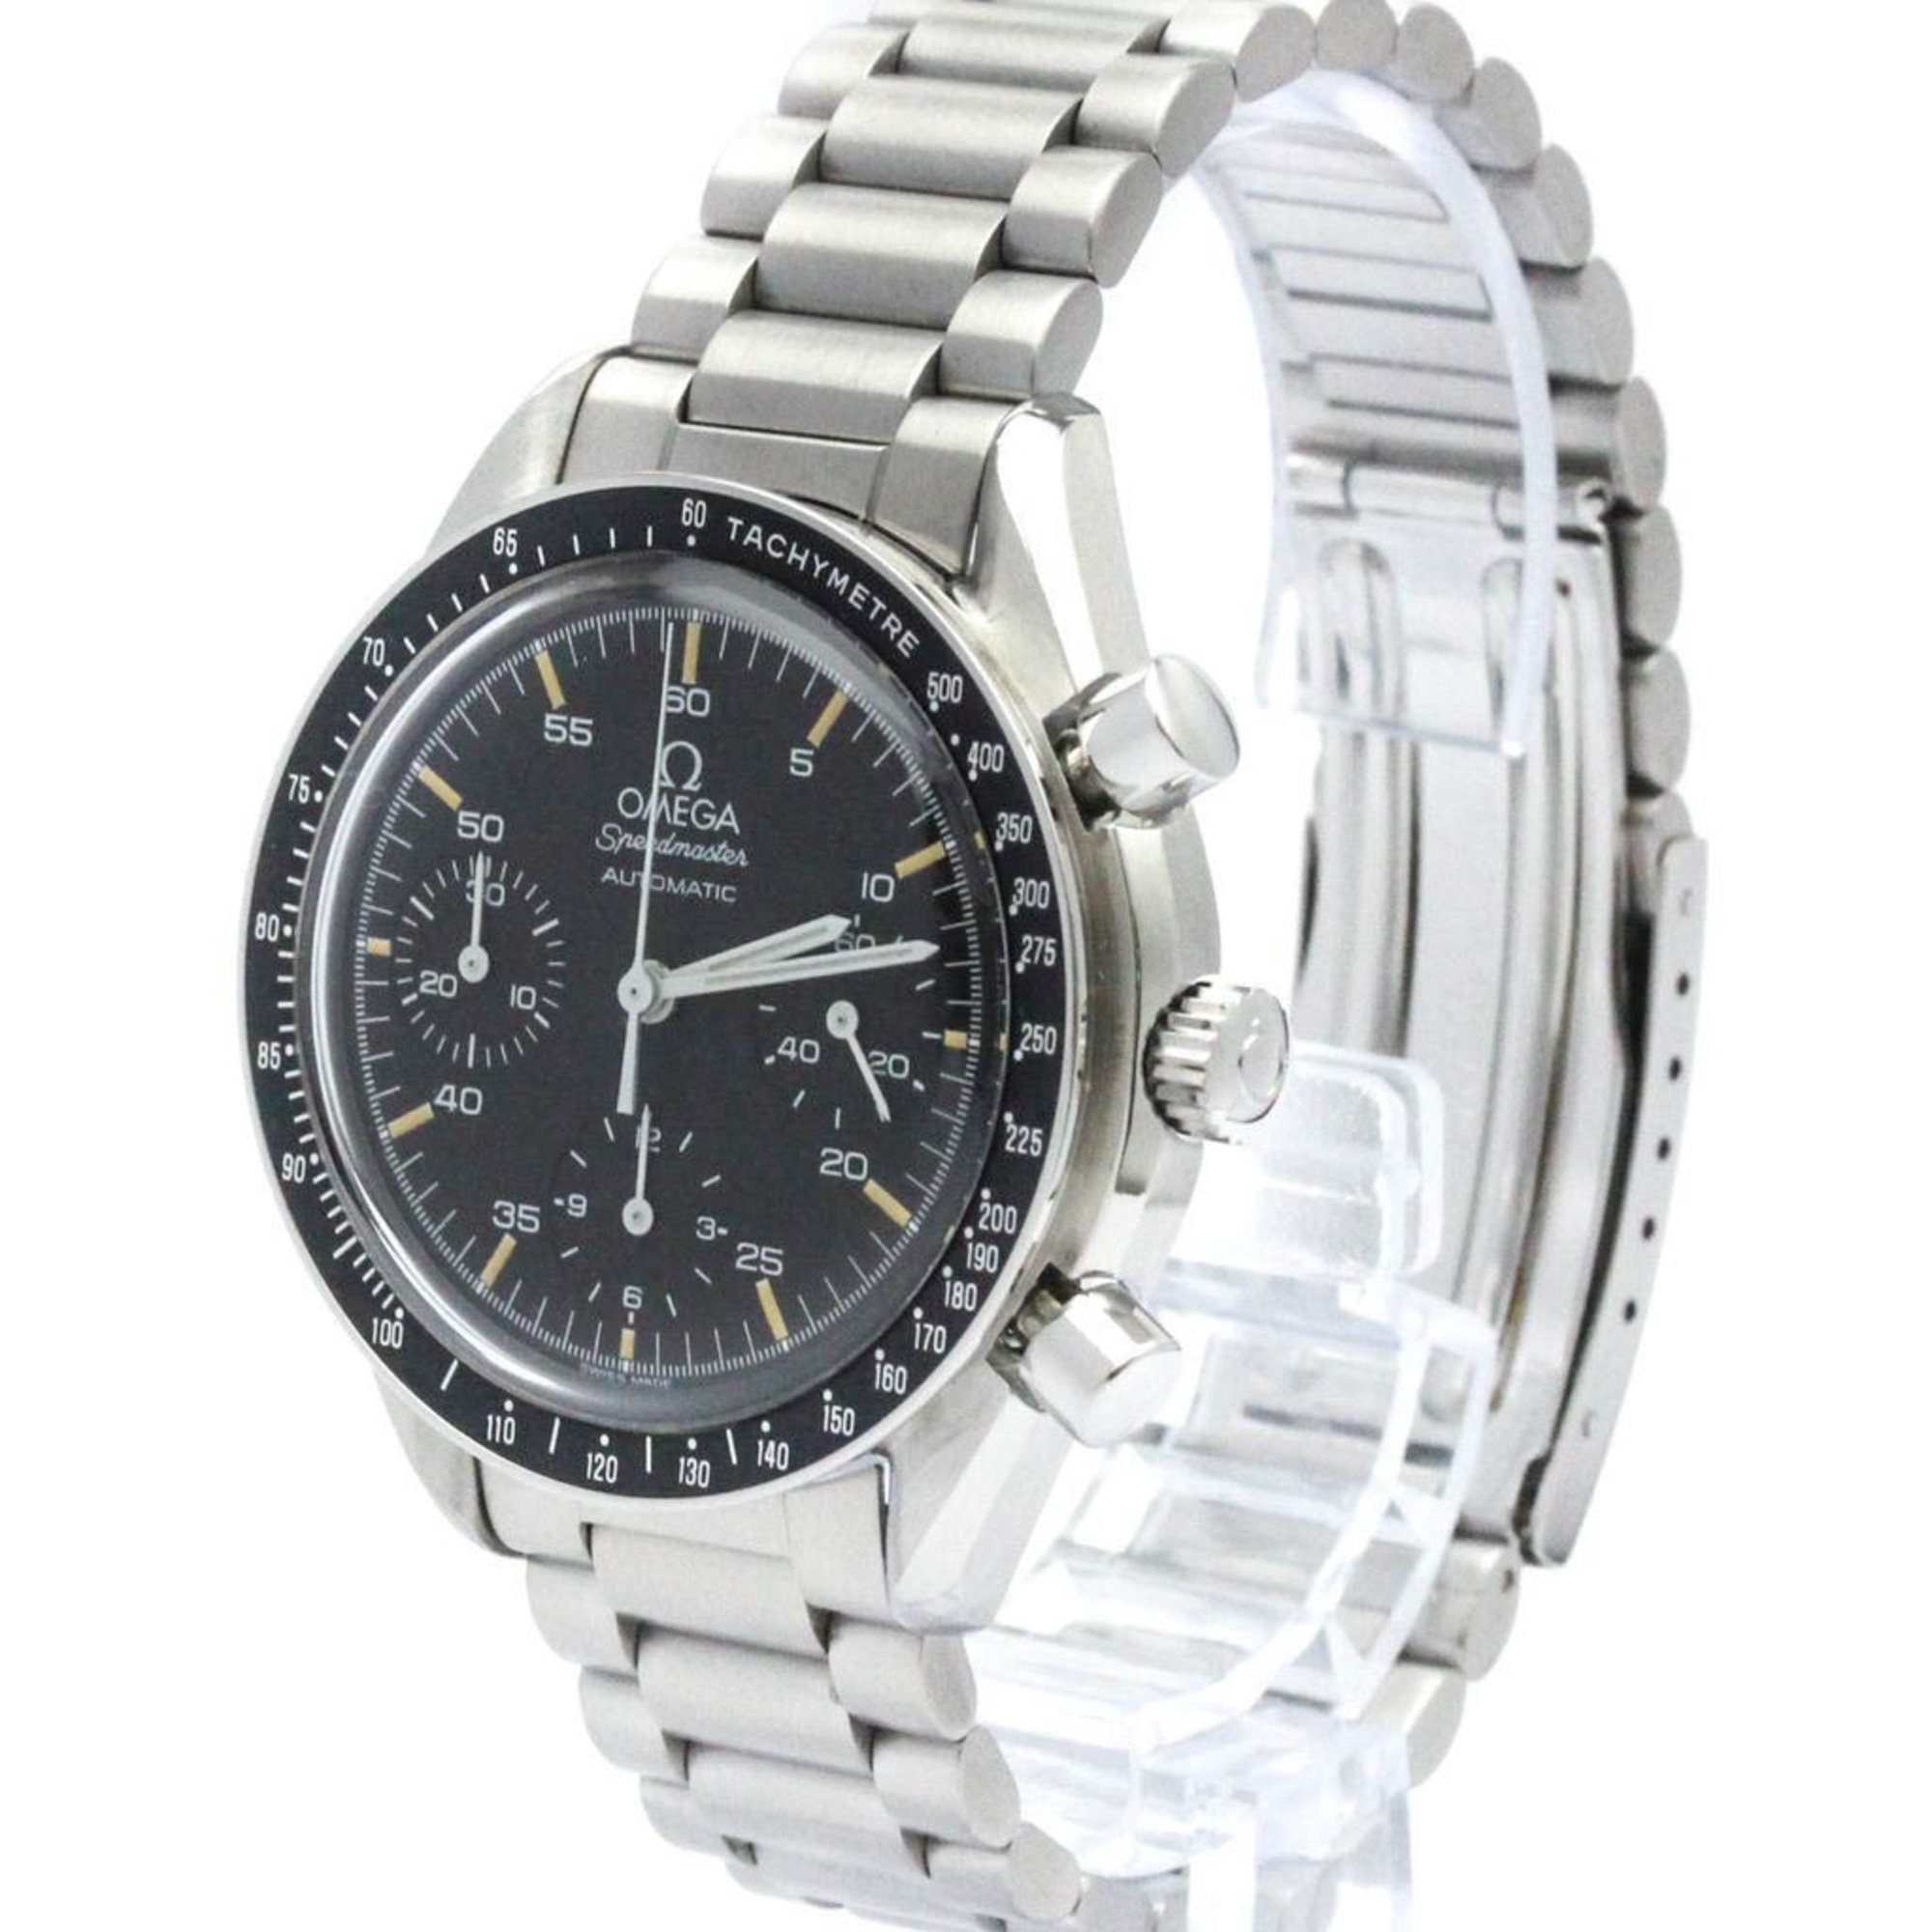 Polished OMEGA Speedmaster Automatic Steel Mens Watch 3510.50 BF563387